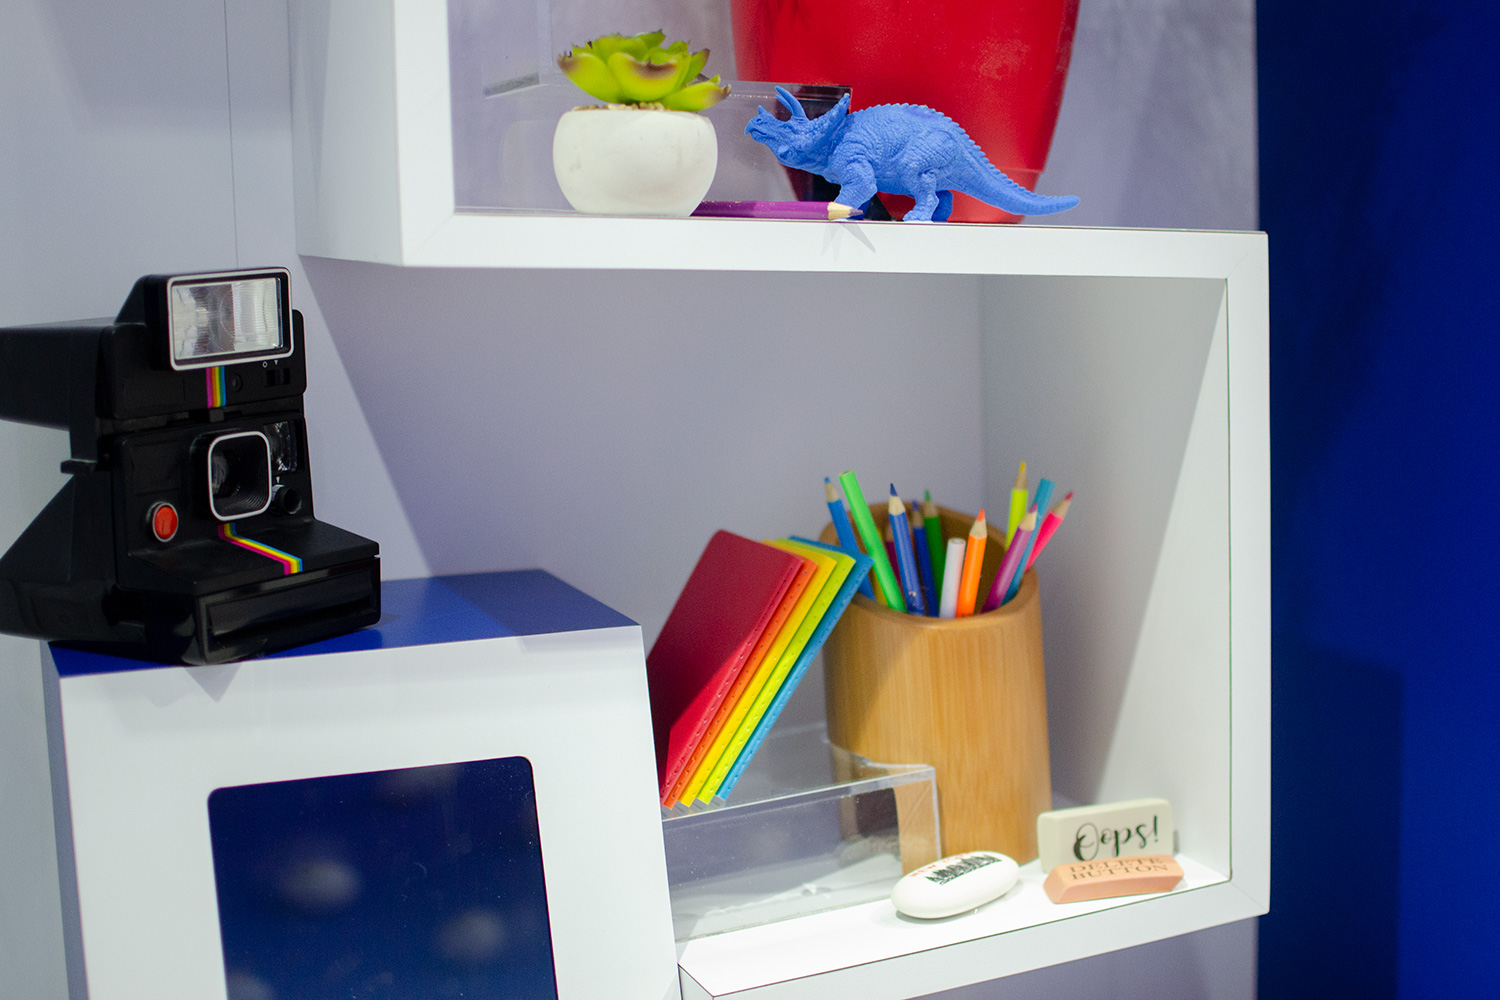 googles mini golf pop up event in nyc highlights its smart home products google knickknacks